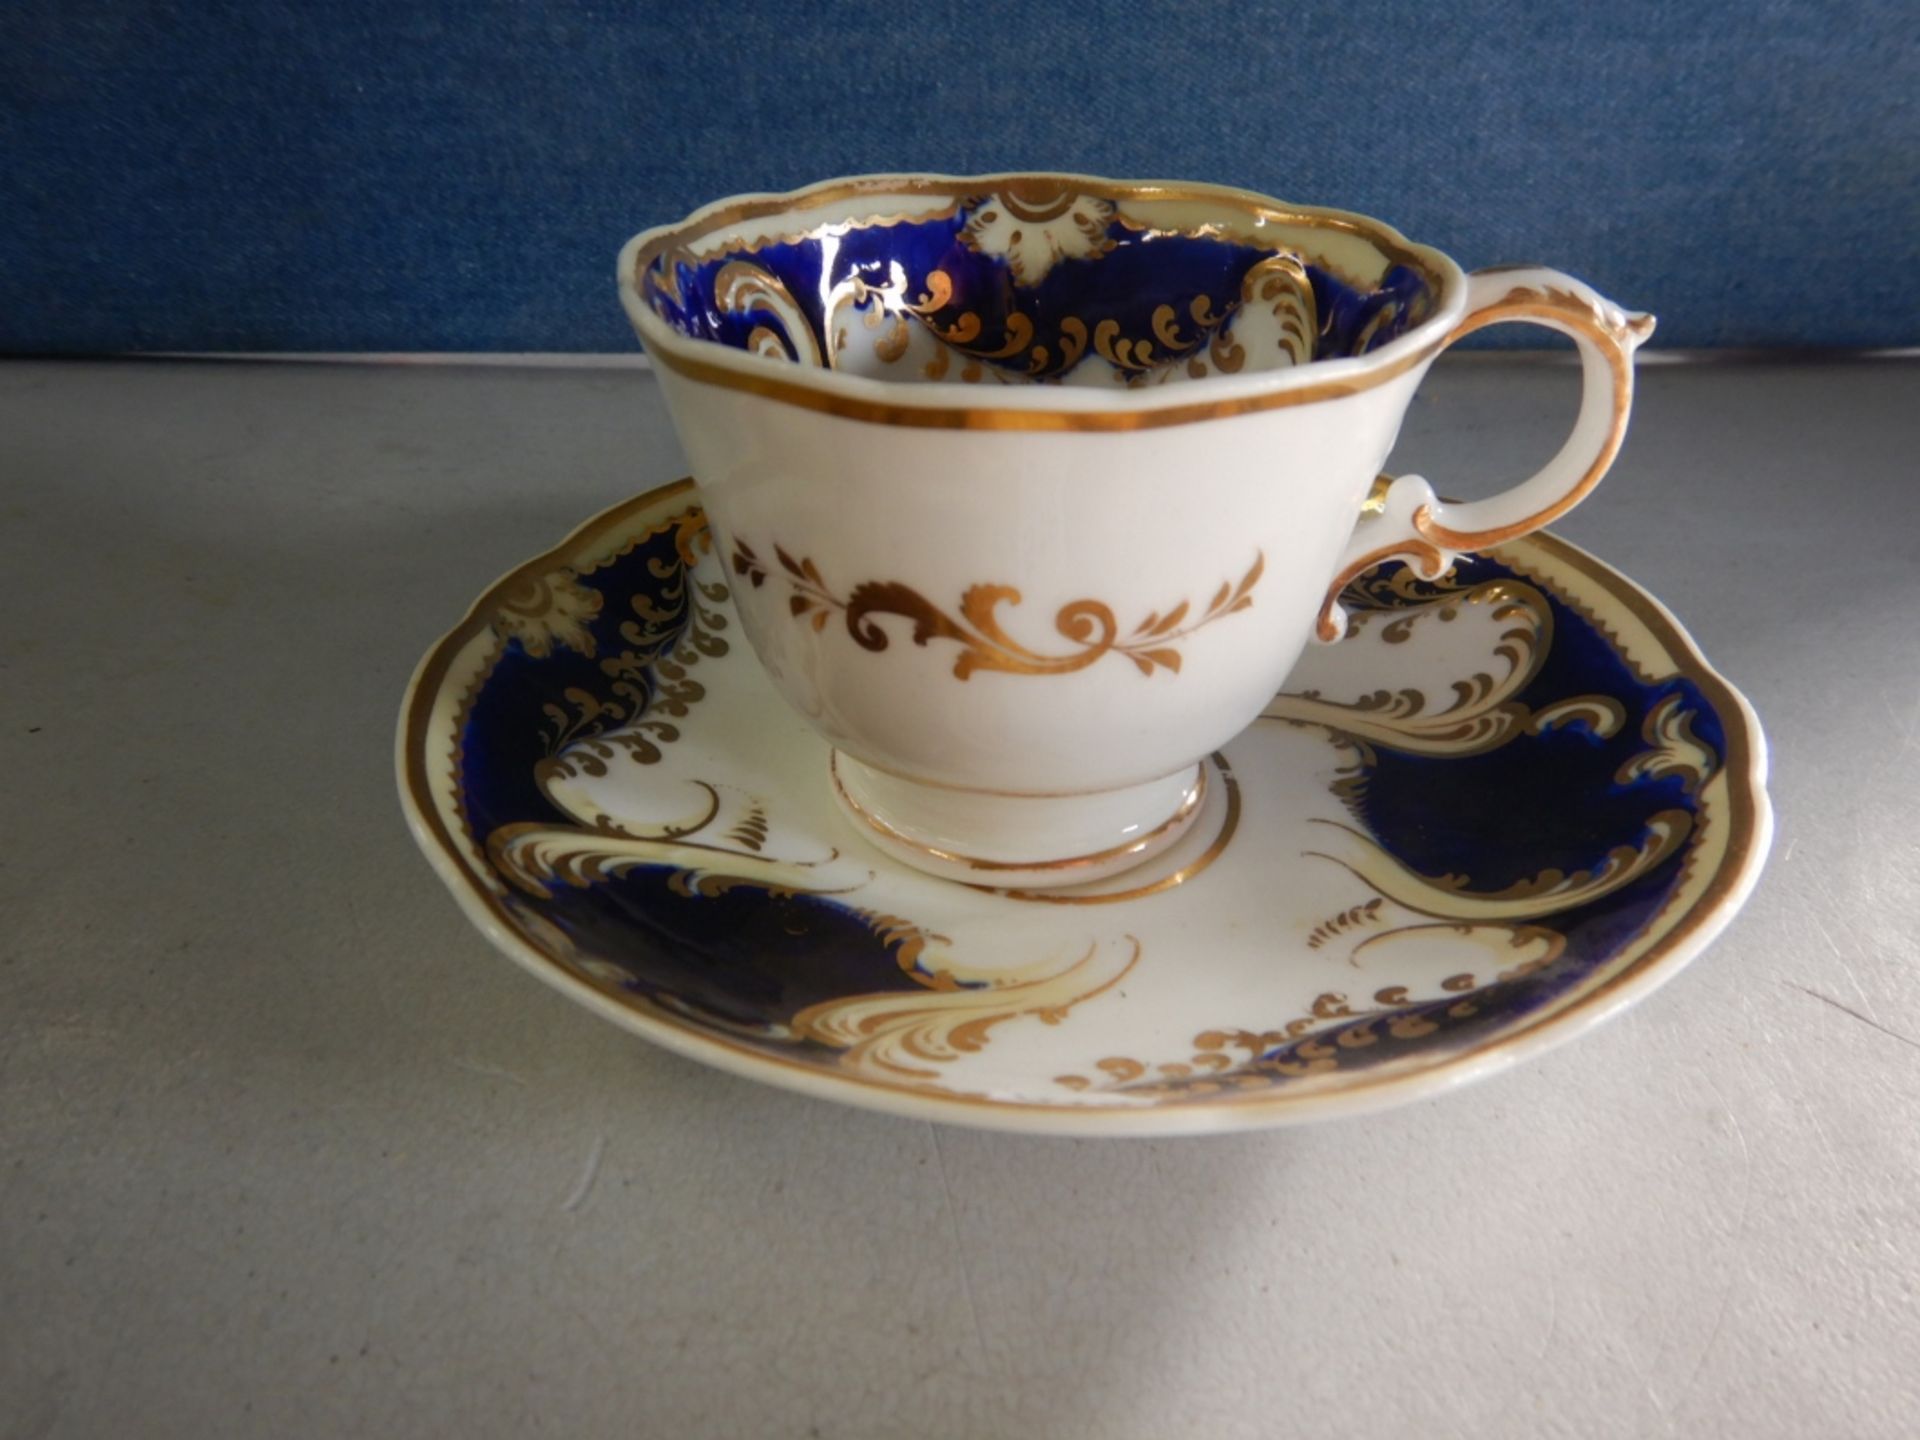 ANTIQUE TEACUP & SAUCER - FINE CHINA - VERY OLD #166/10